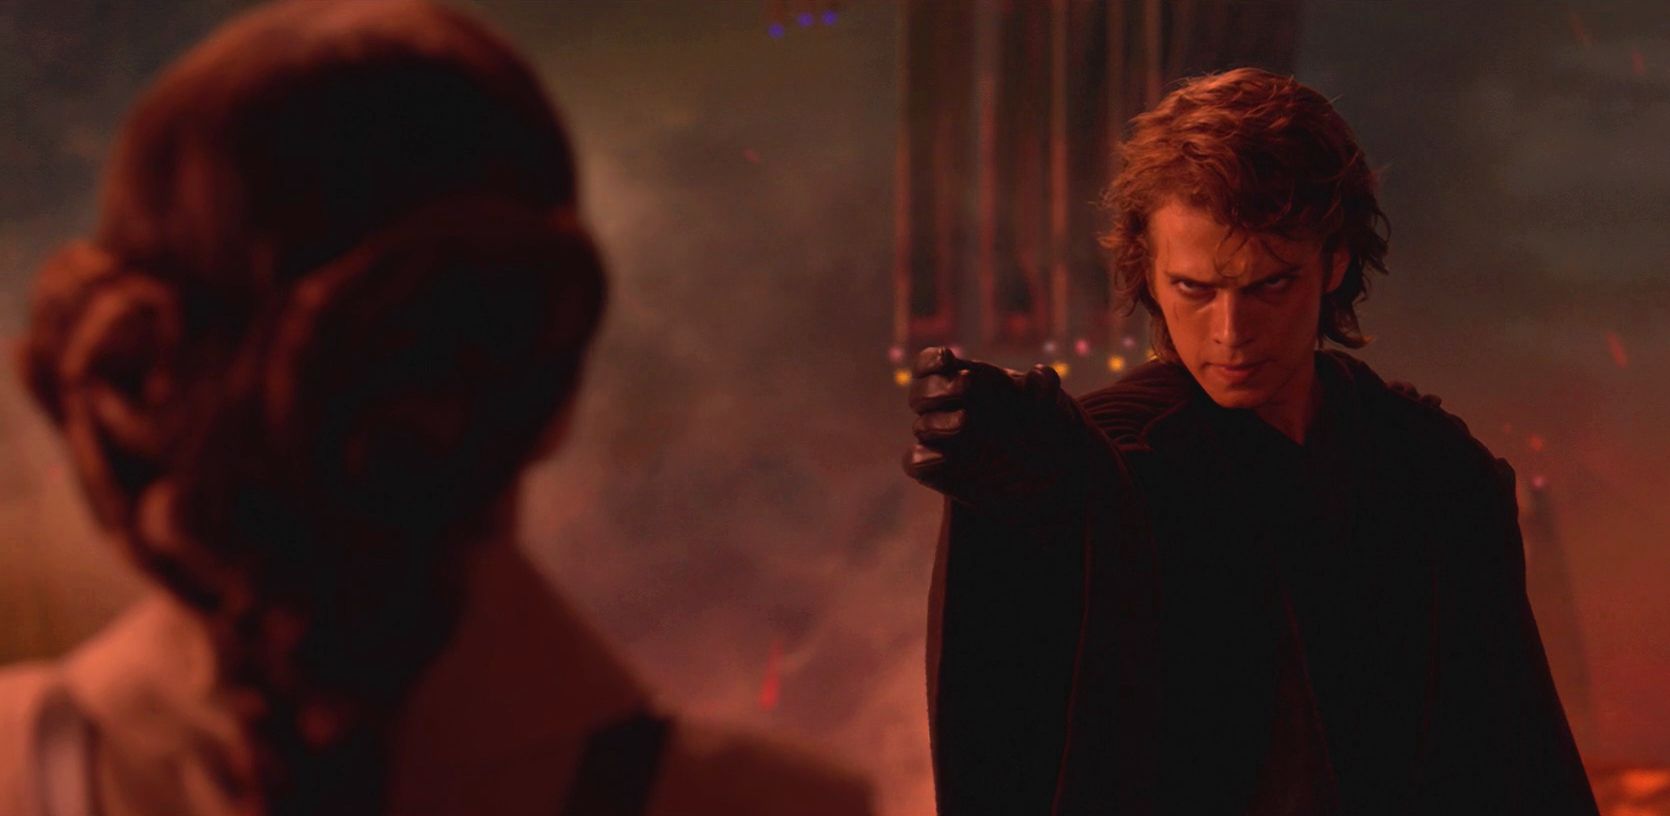 padme-nearly-killed-anakin-in-original-revenge-of-the-sith-ending